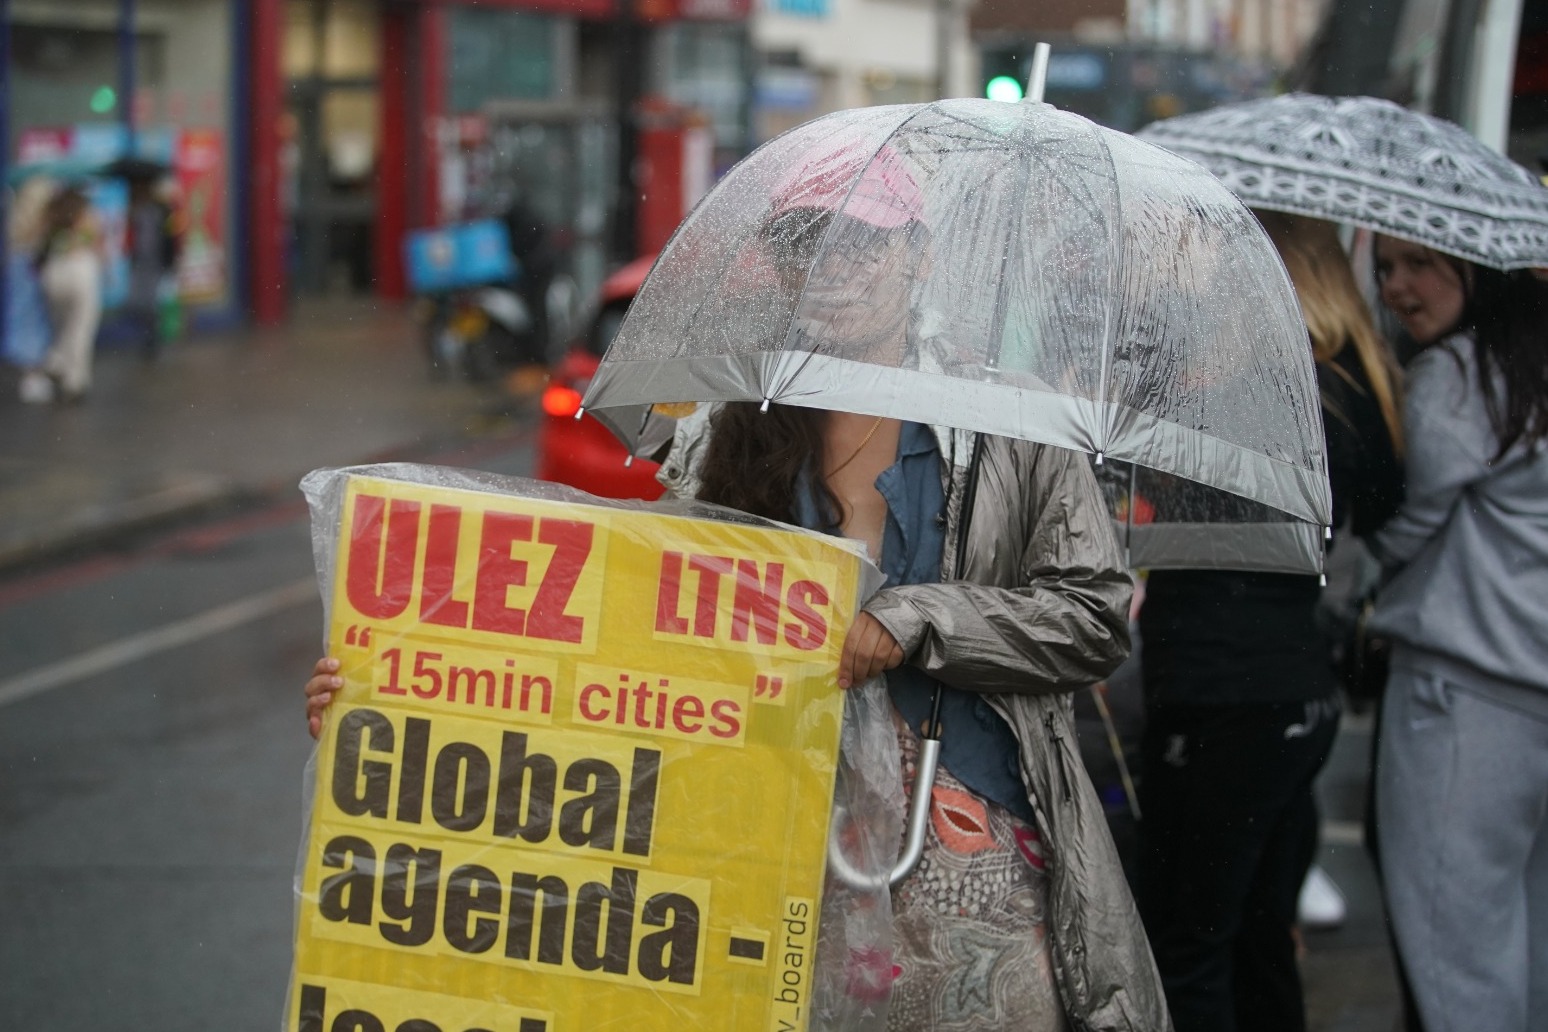 Protesters call for rethink on expansion of ULEZ scheme 